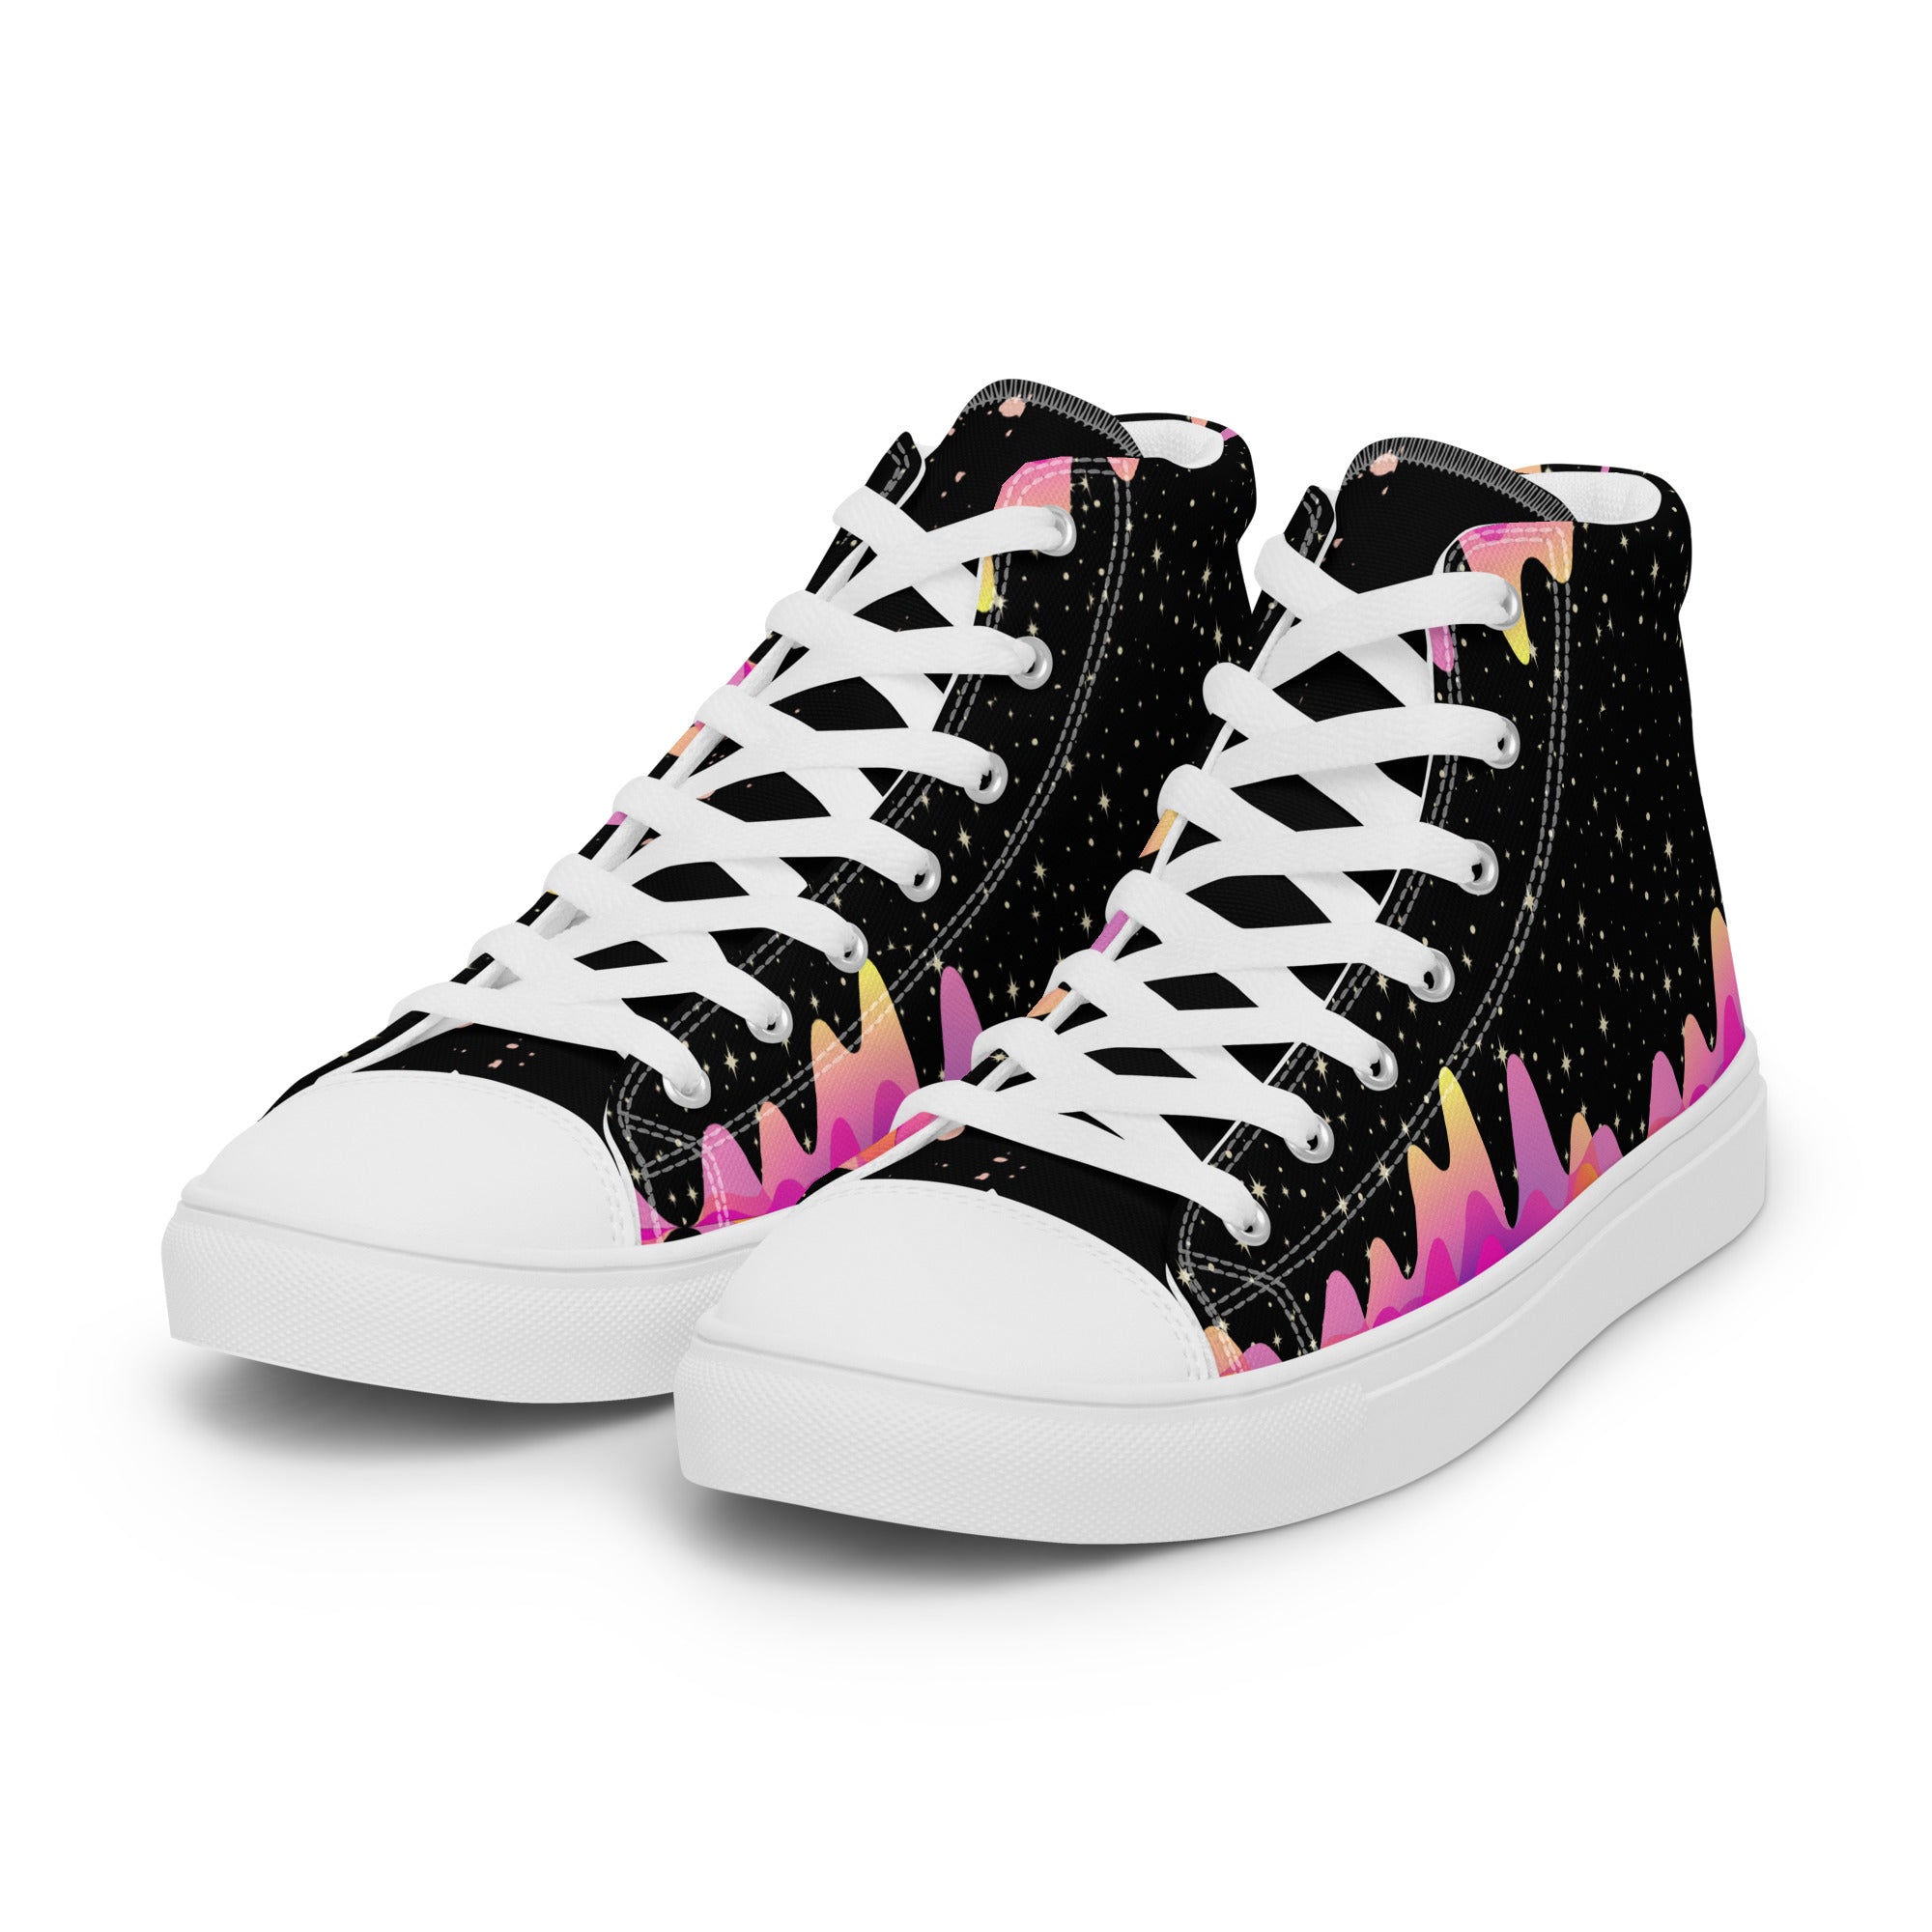 Limited edition women’s high top canvas sneaker shoes custom designer with Sound wave pattern print